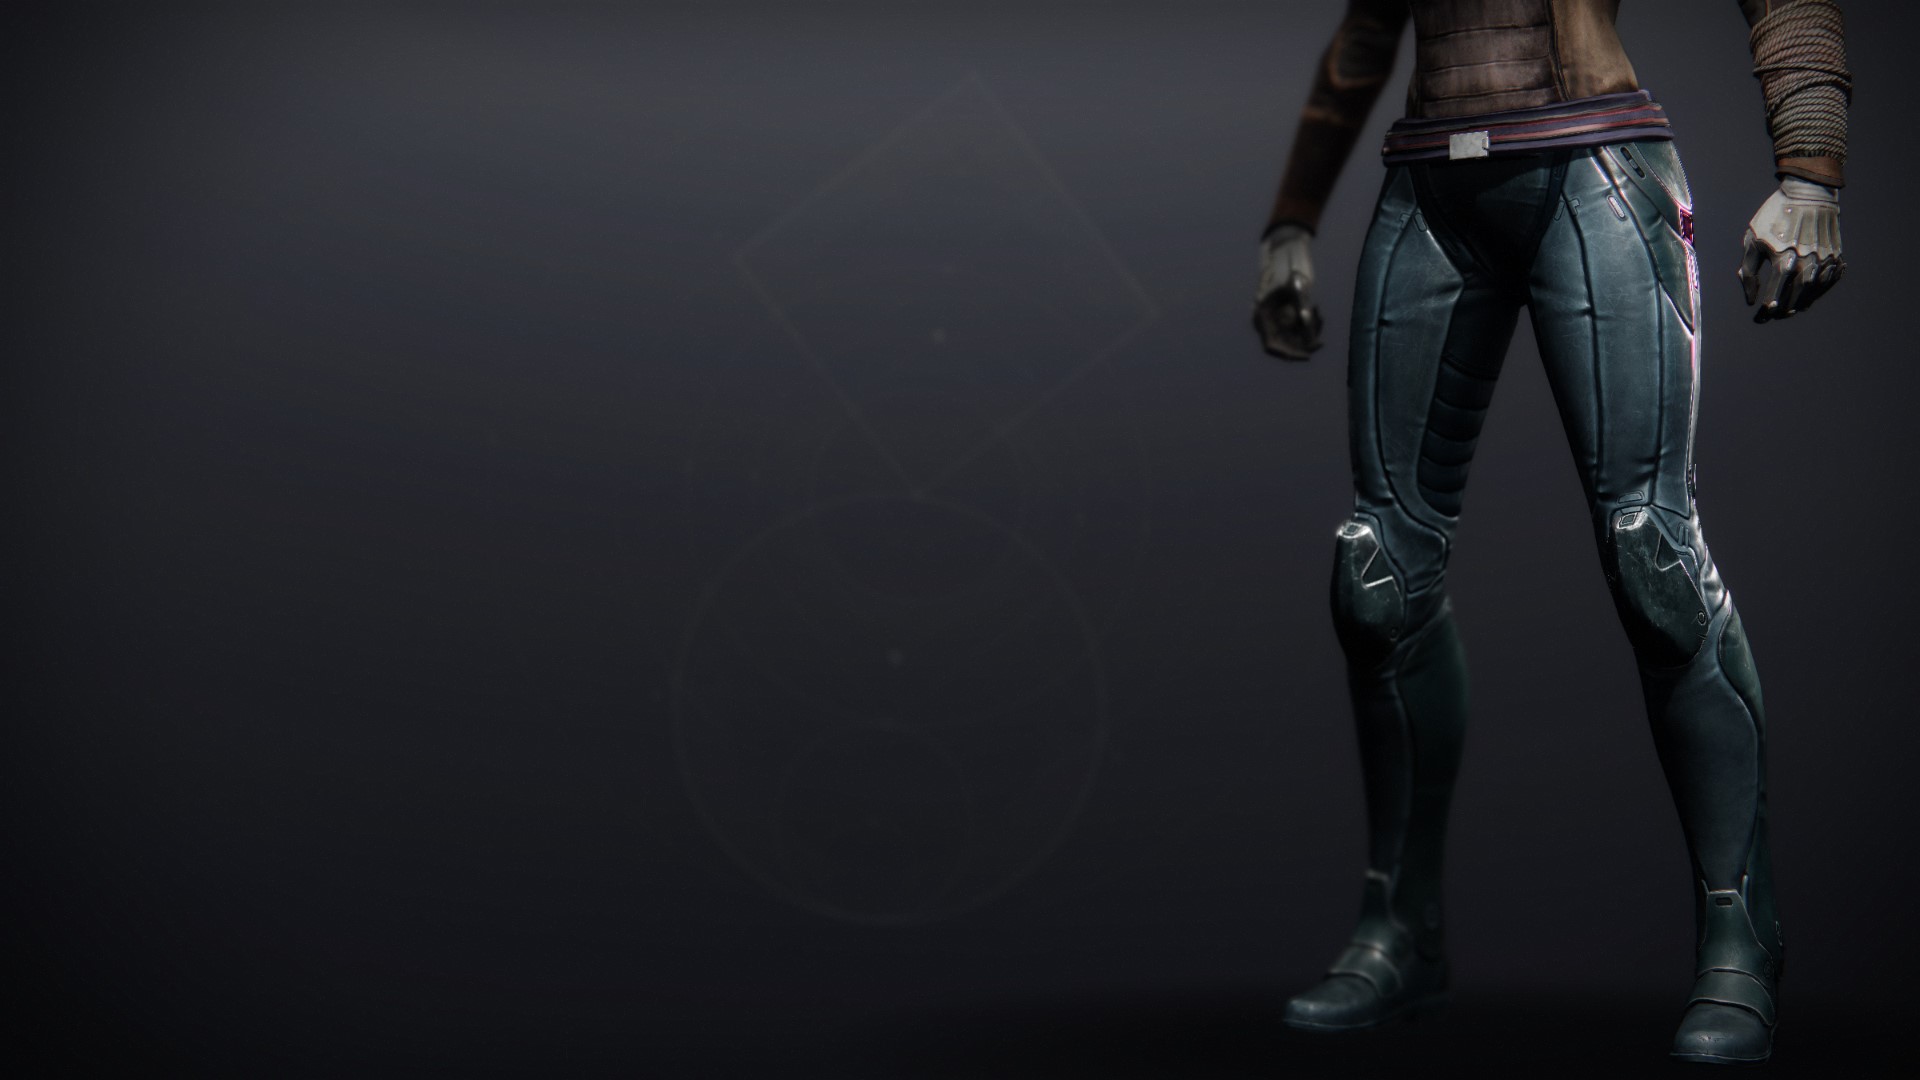 An in-game render of the Pathfinder's Legguards.